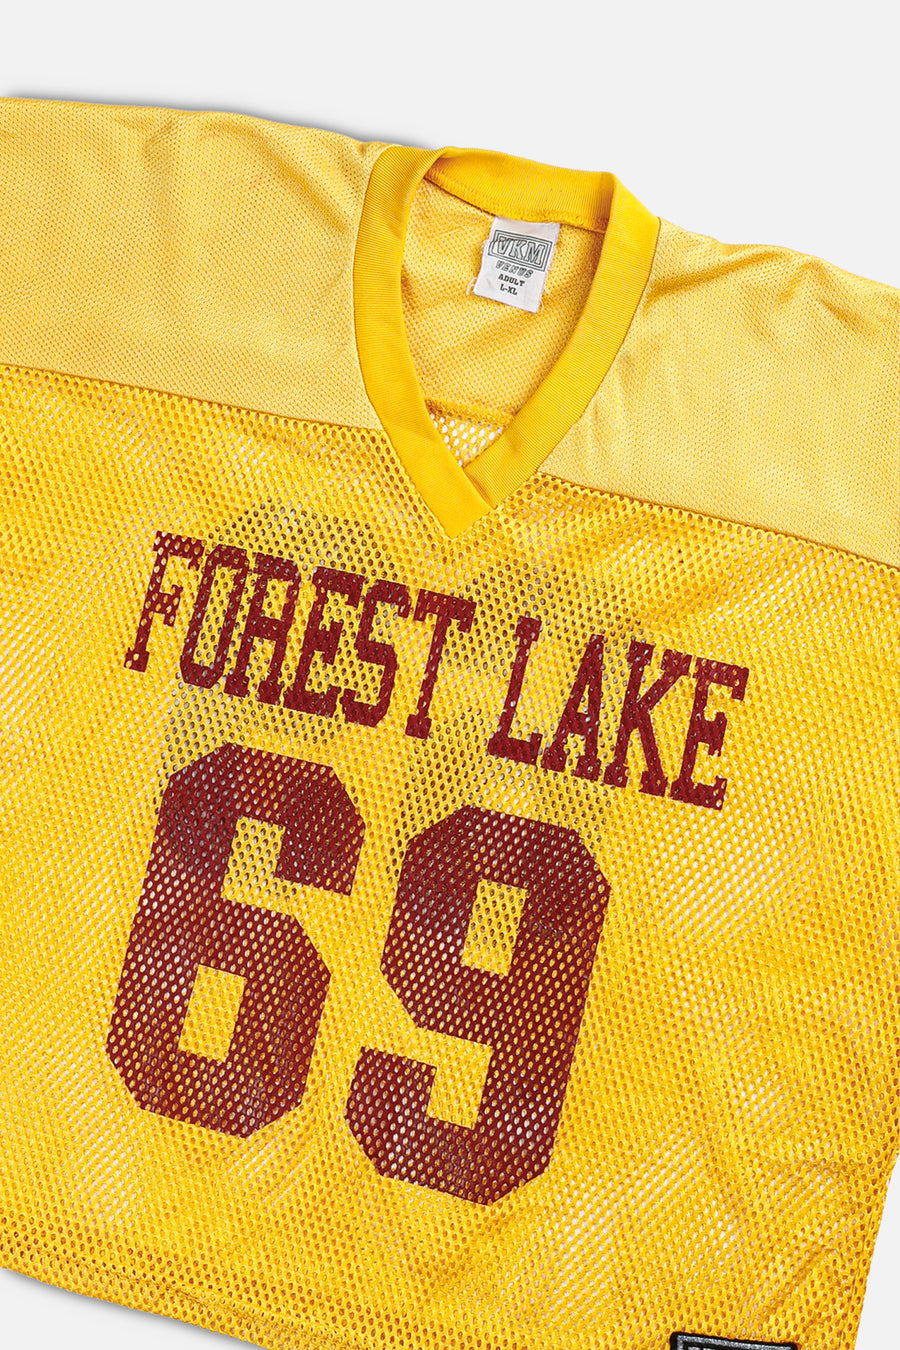 Vintage Forest Lake Football Jersey - L